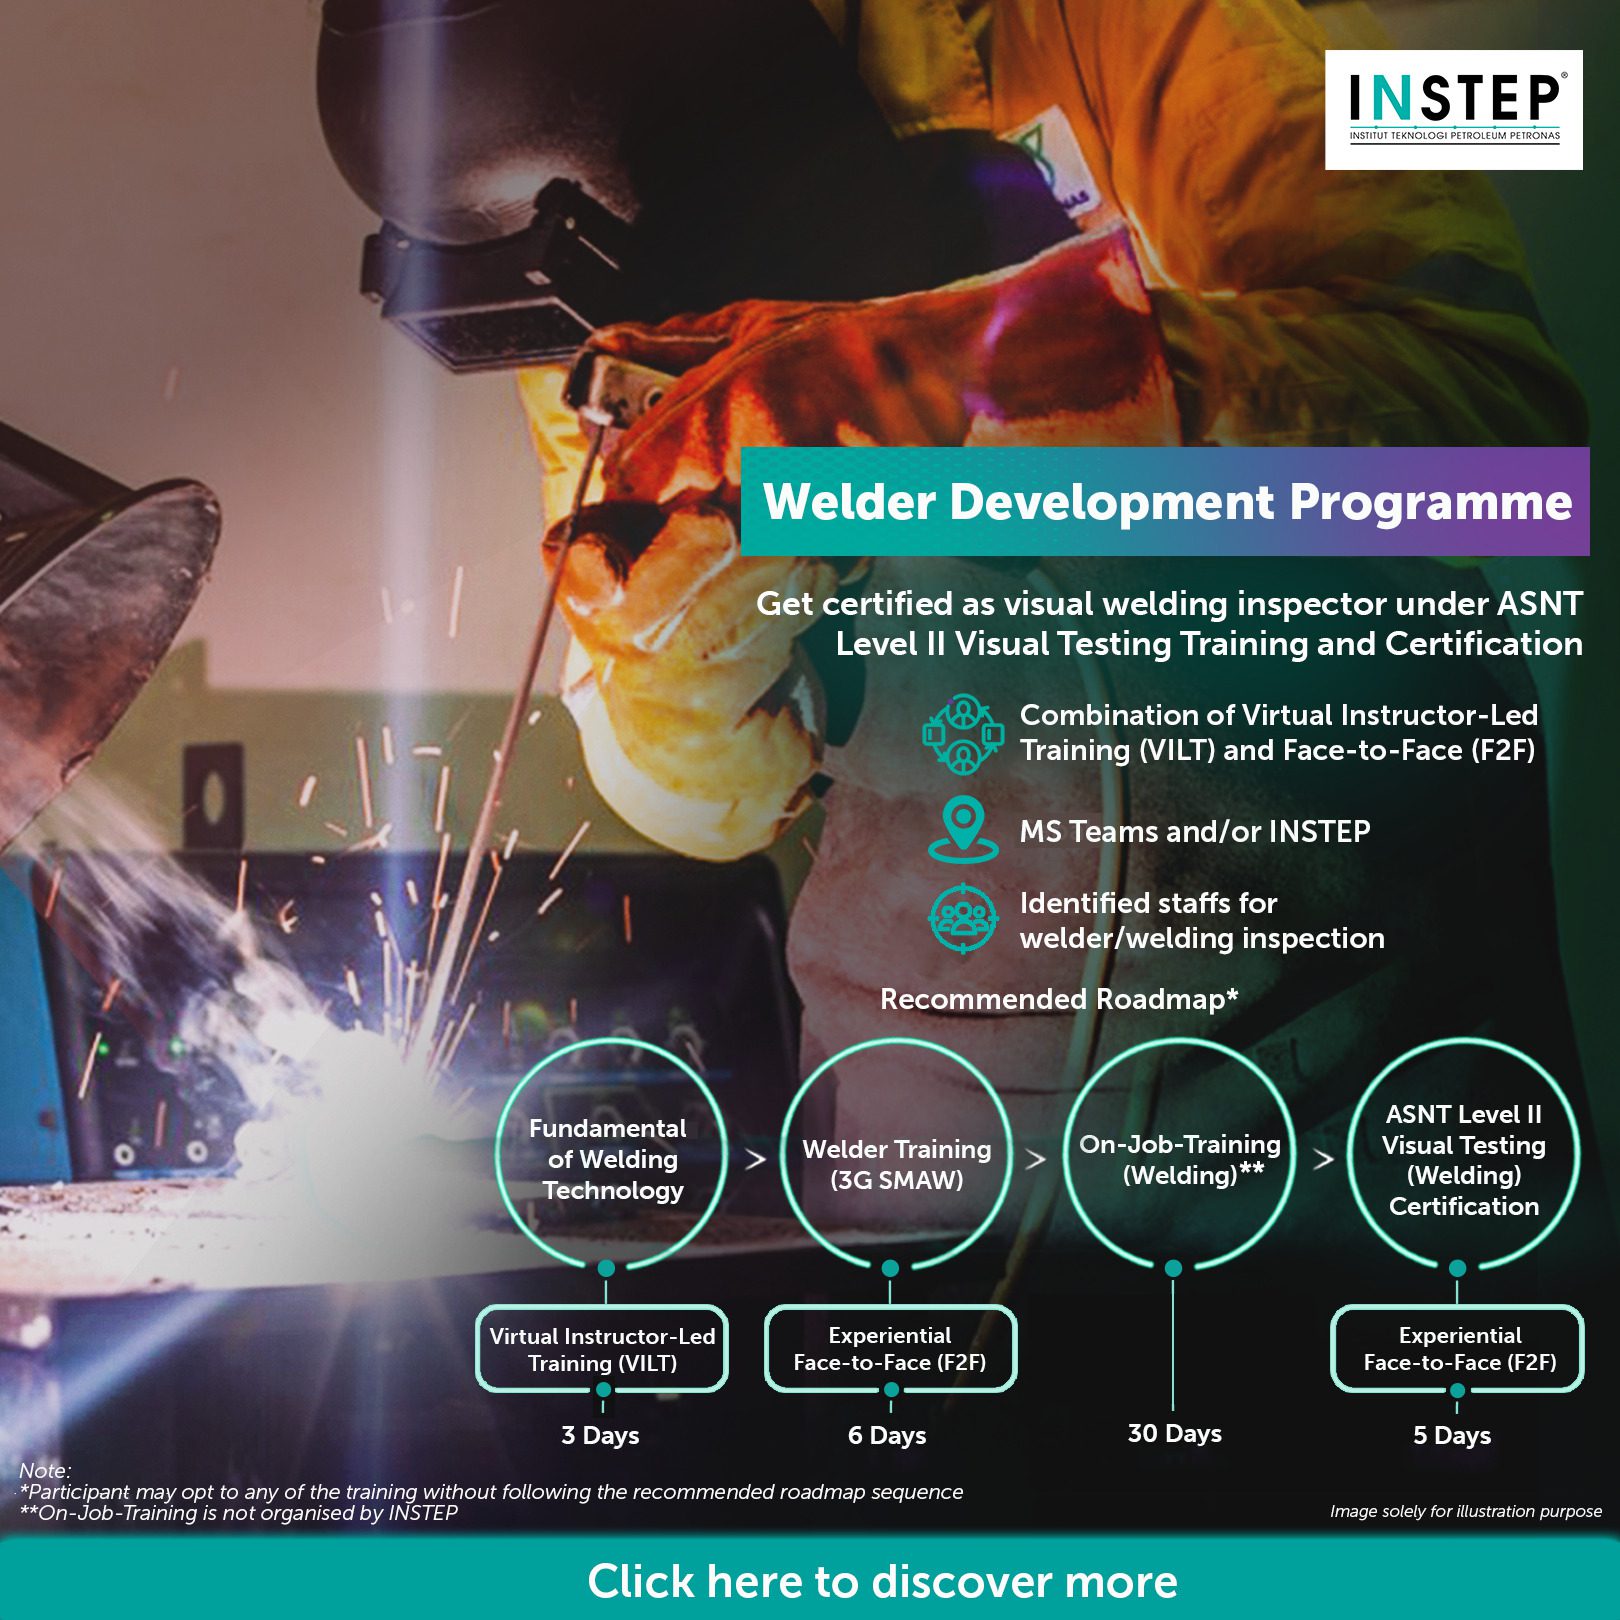 We are back with Face-To-Face (F2F) training for Welder Development Programme